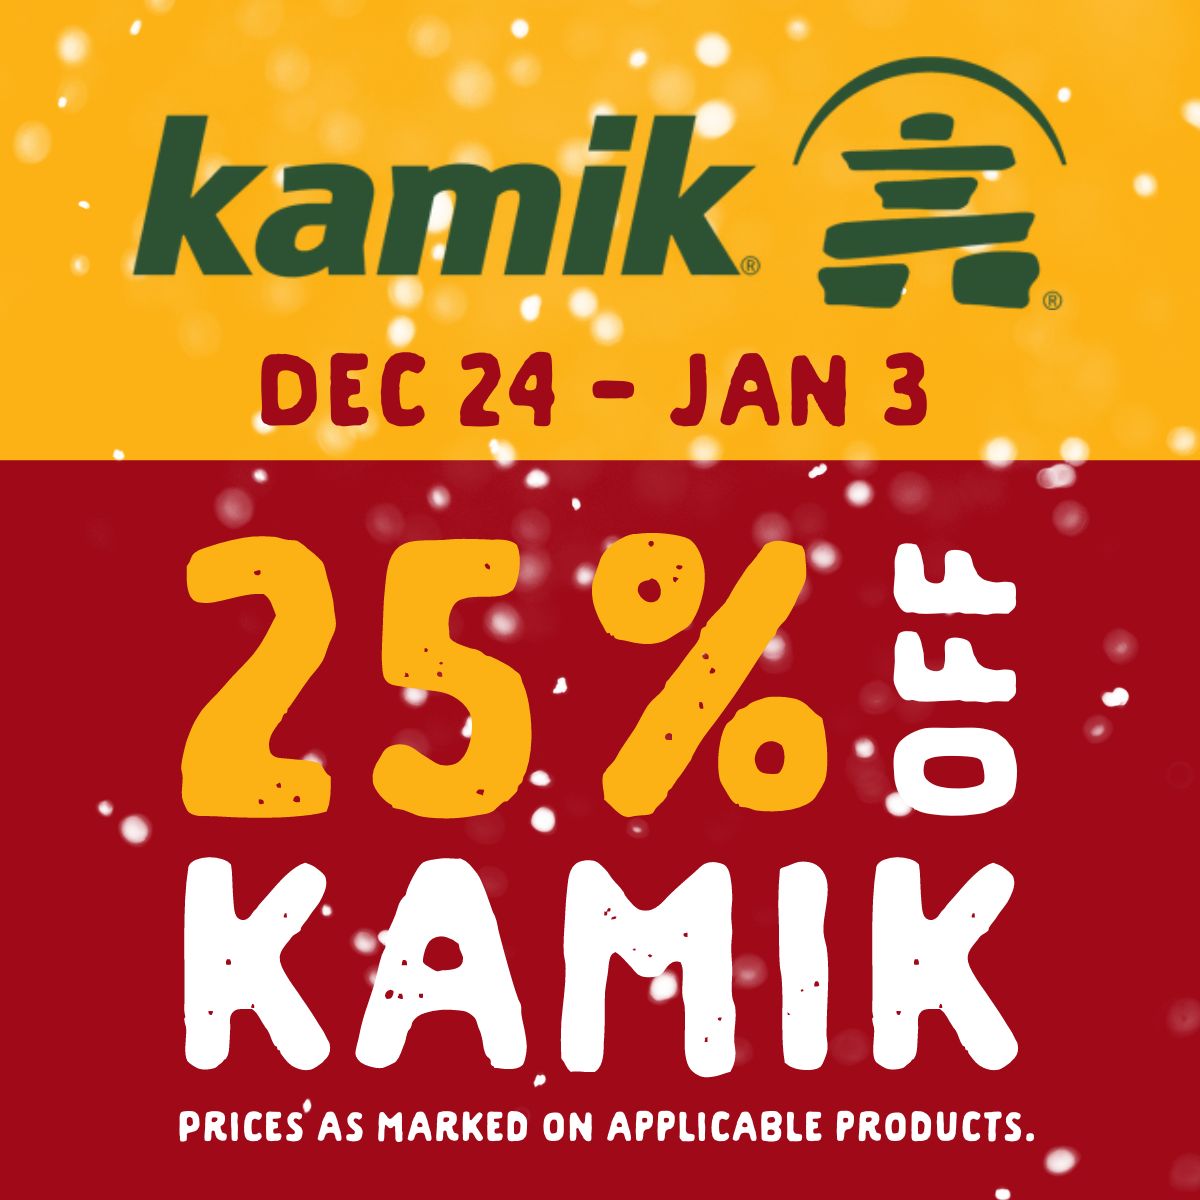 25% off Kamik from December 24 until January 3. Prices as marked on applicable products.